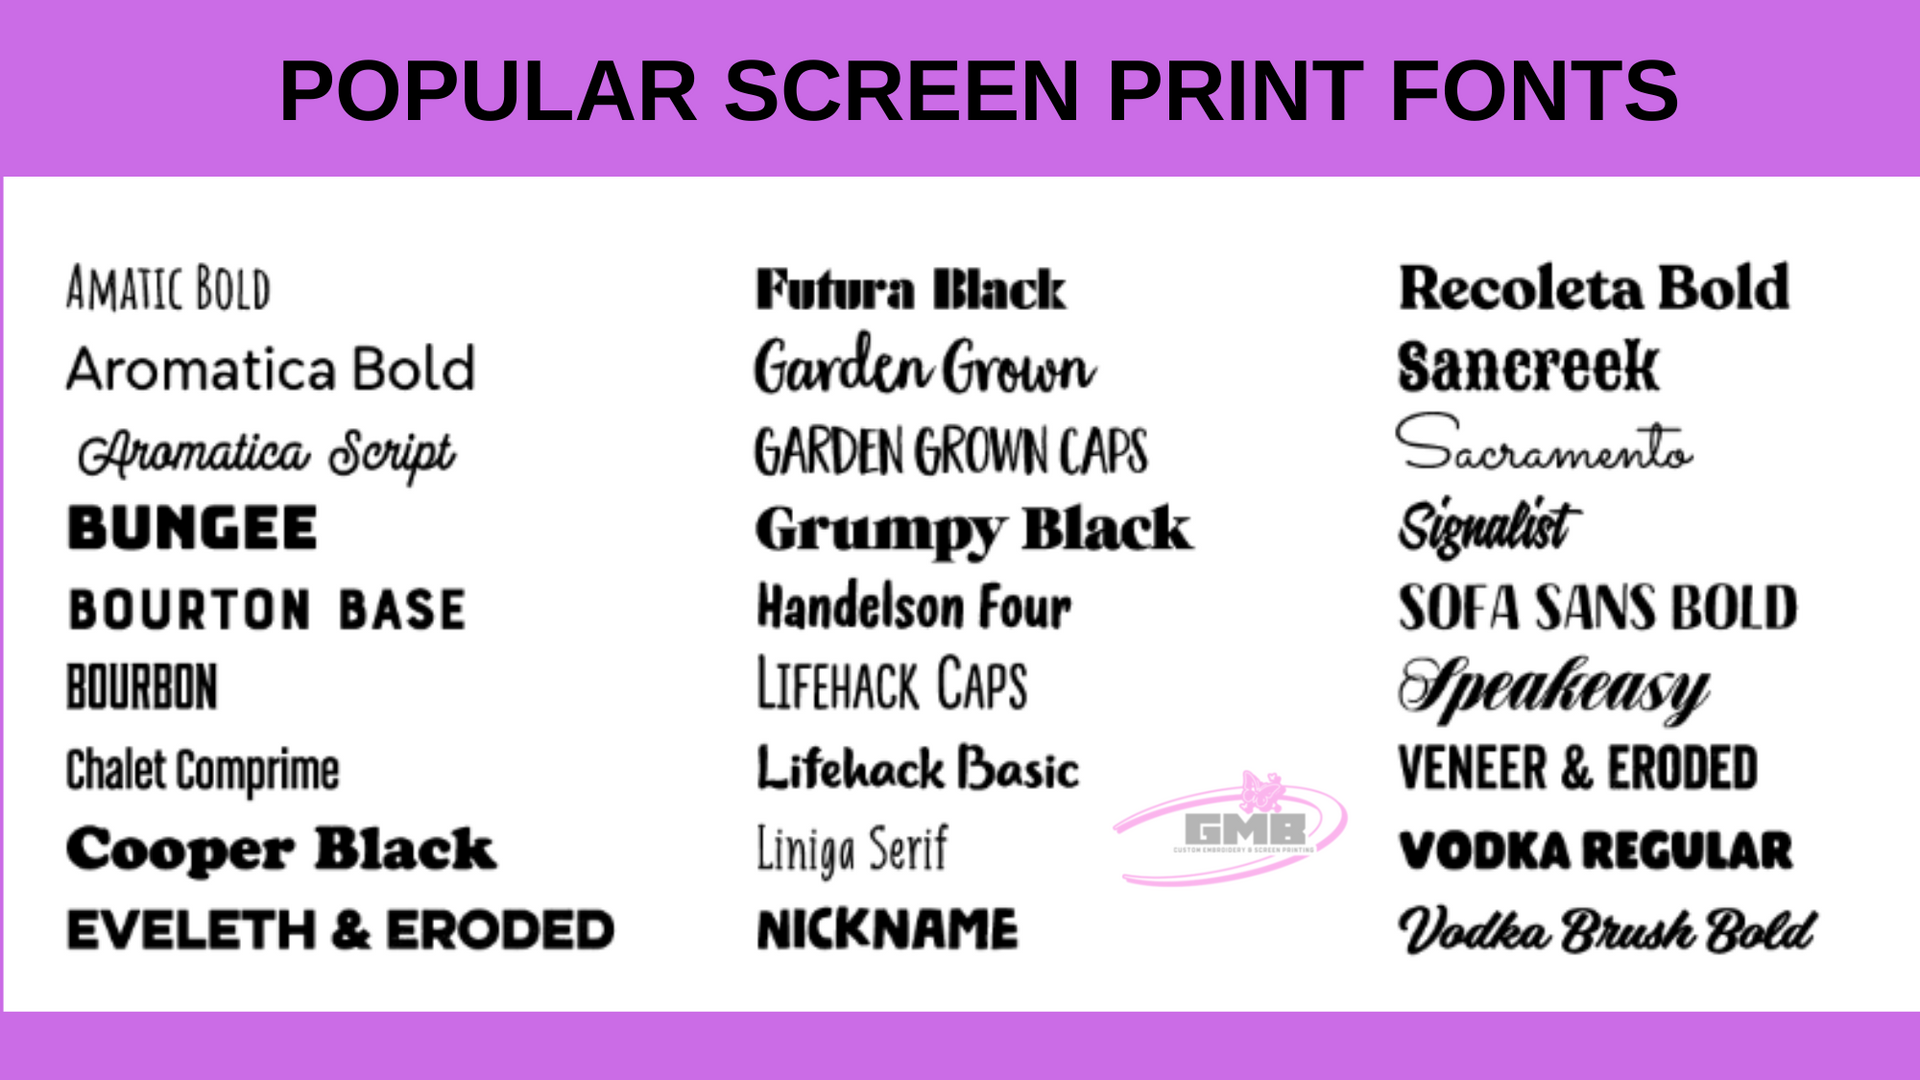 A list of popular screen print fonts on a purple background